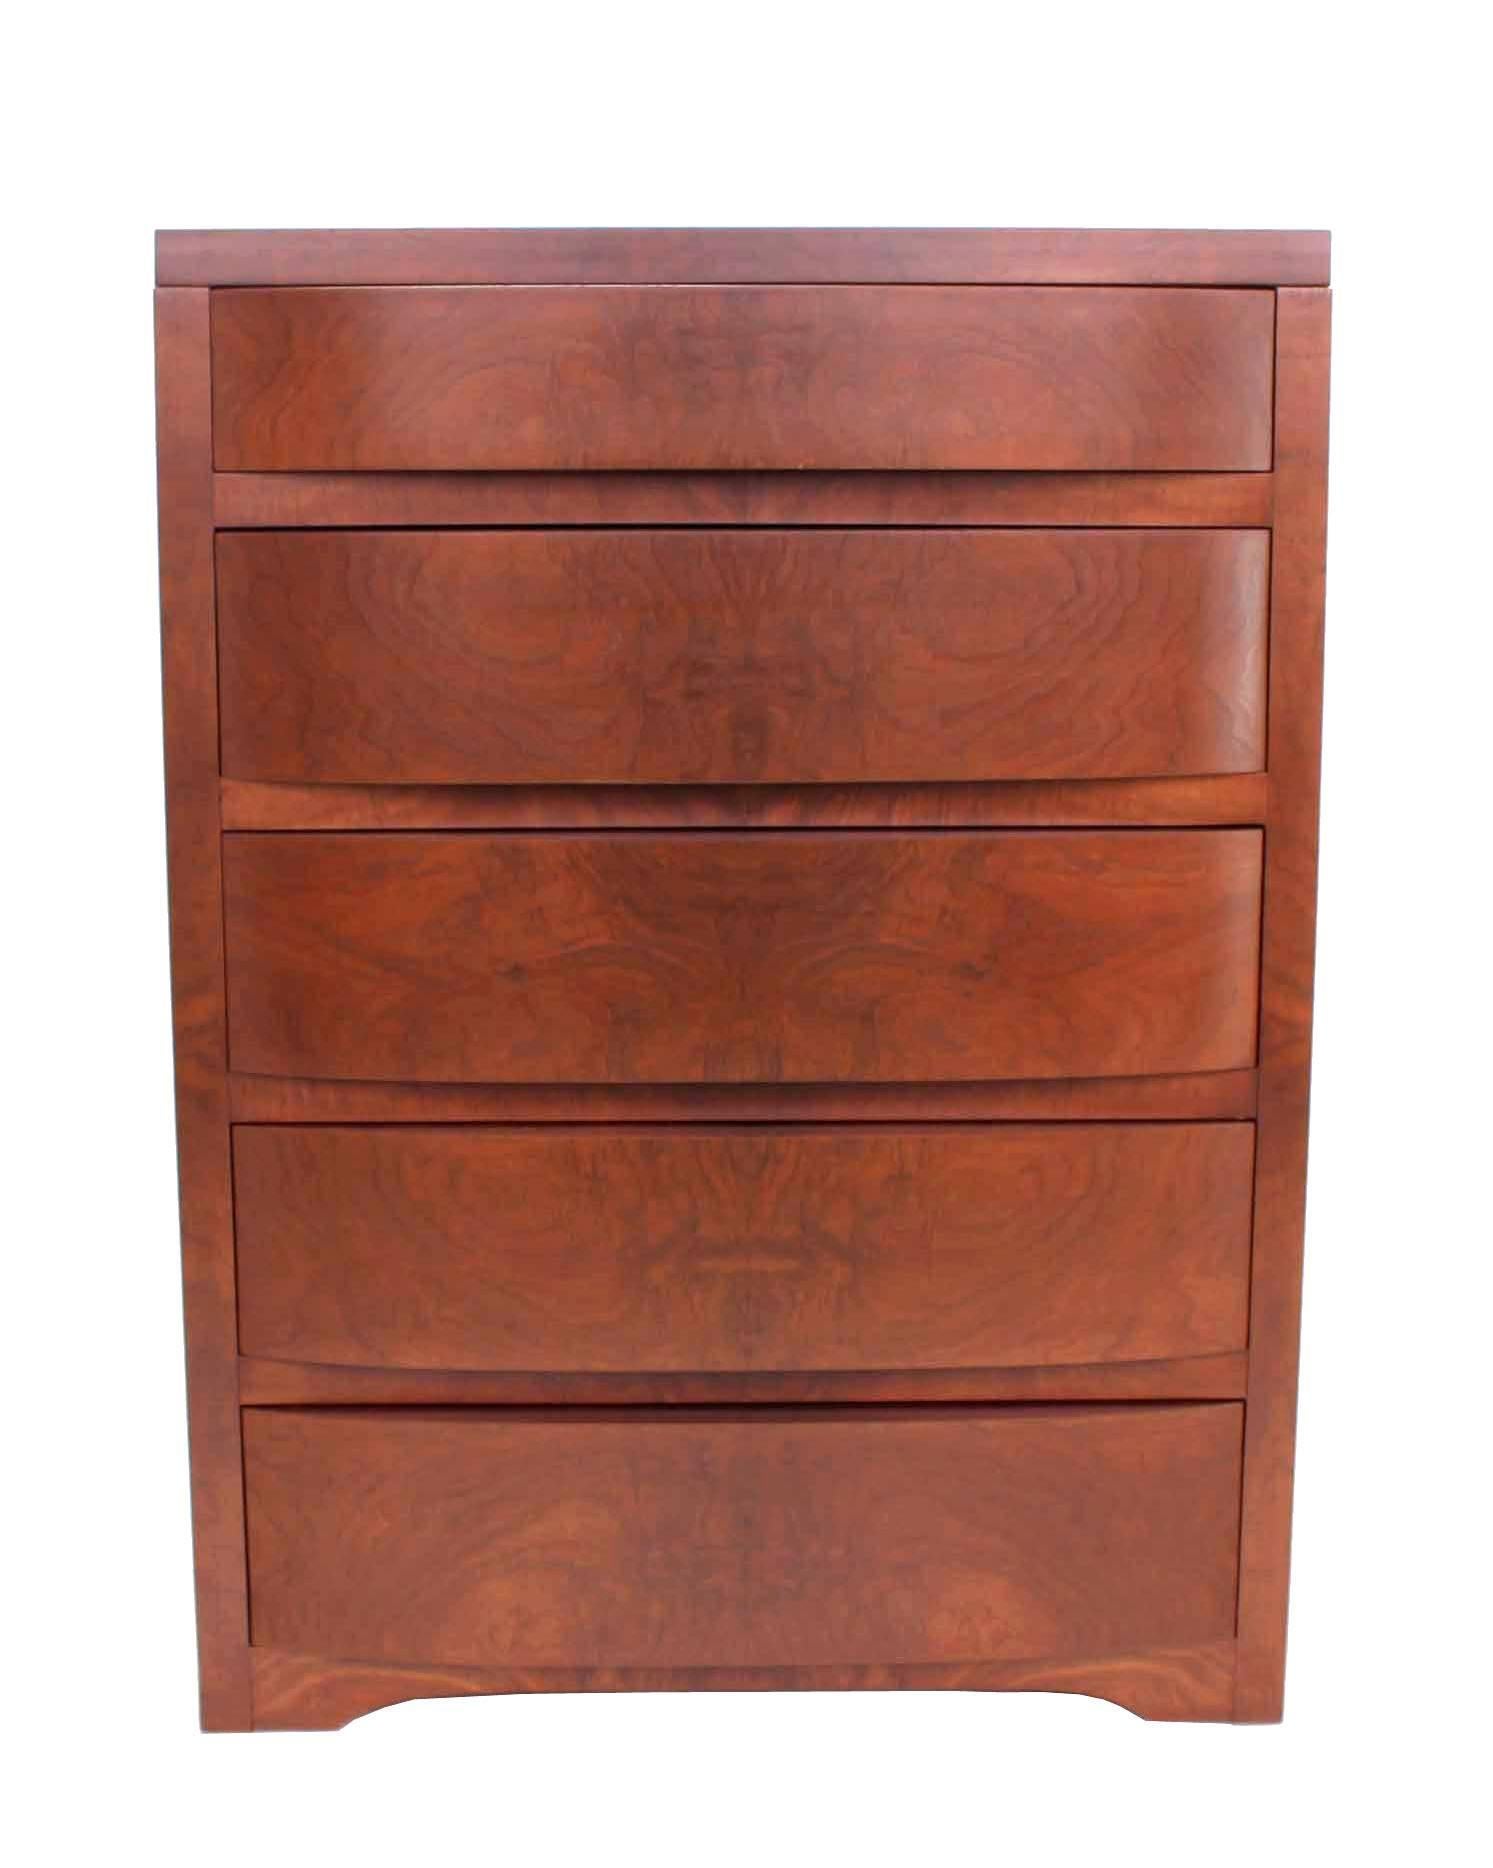 American Concealed Mirror Art Deco Burl Wood High Chest Dresser Chest of Drawers. For Sale